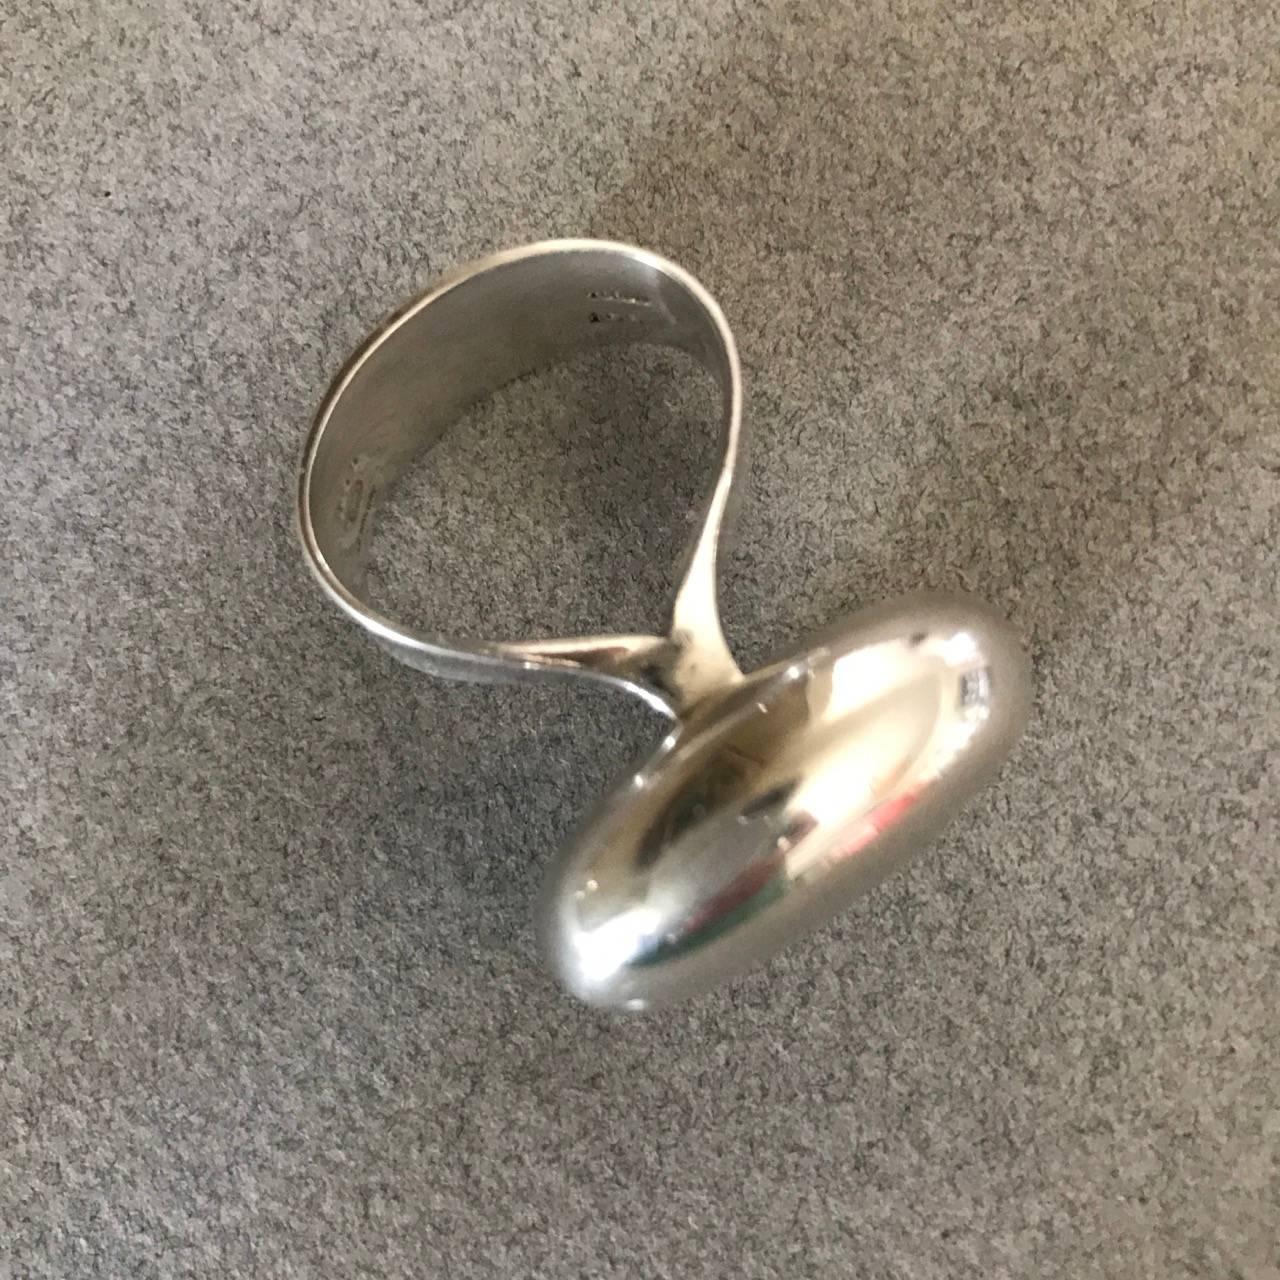 Georg Jensen Modernist Sterling Silver Ring No. 155 by Vivianna Torun (SIZE 6.5) In Good Condition For Sale In San Francisco, CA